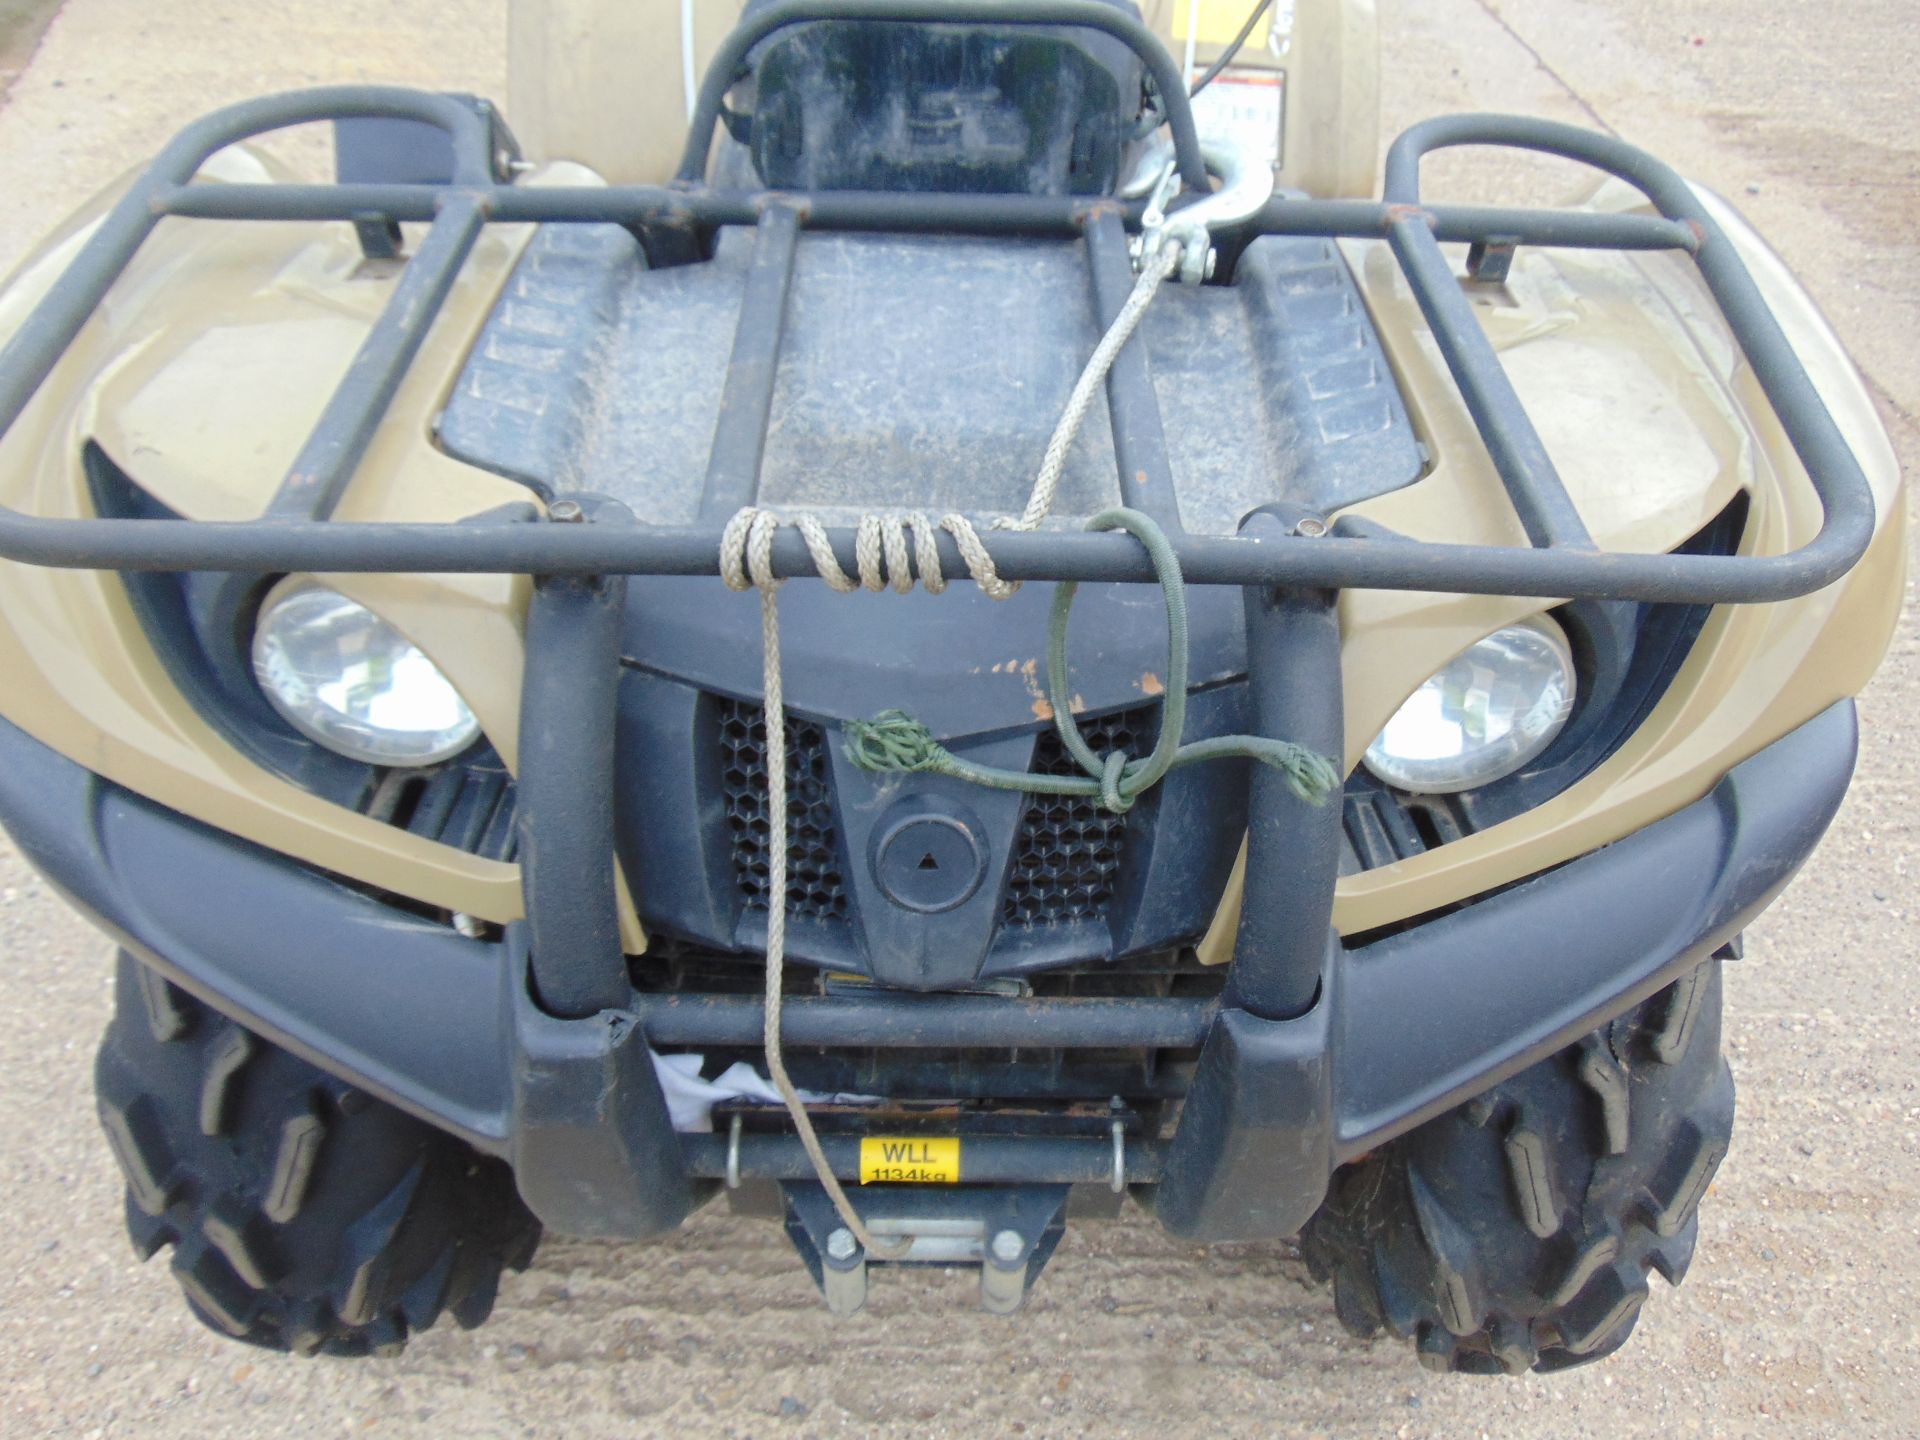 Military Specification Yamaha Grizzly 450 4 x 4 ATV Quad Bike - Image 8 of 16